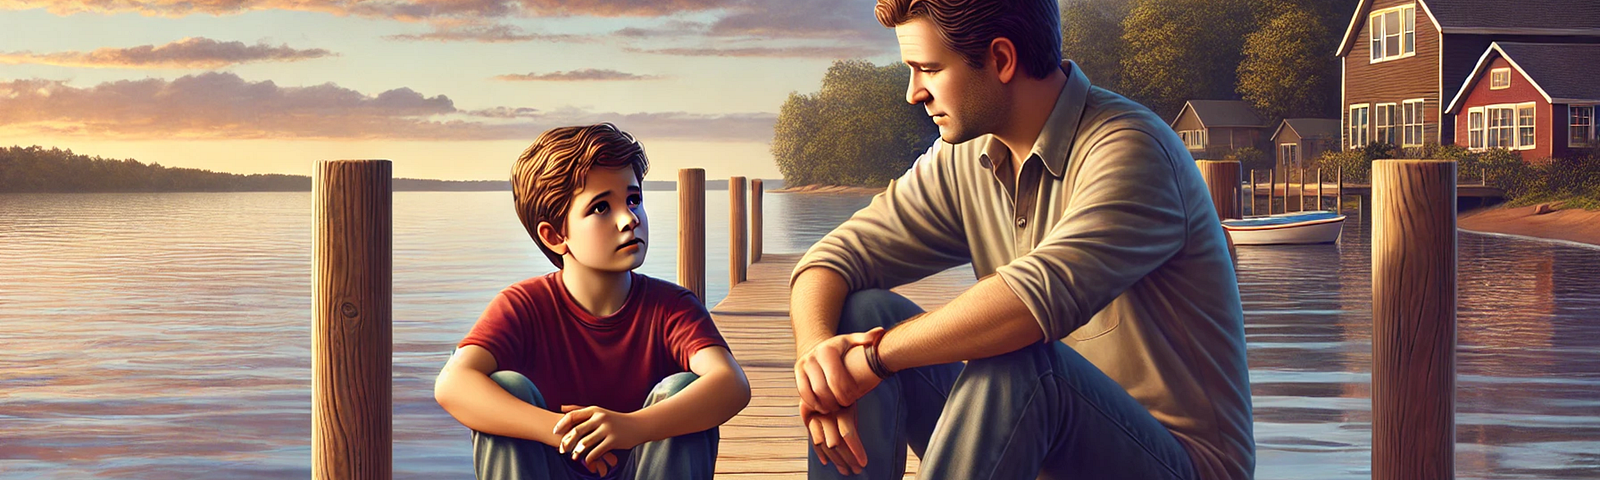 The serene moment between Jake and his dad on the dock emphasizes the emotional connection and learning that takes place.